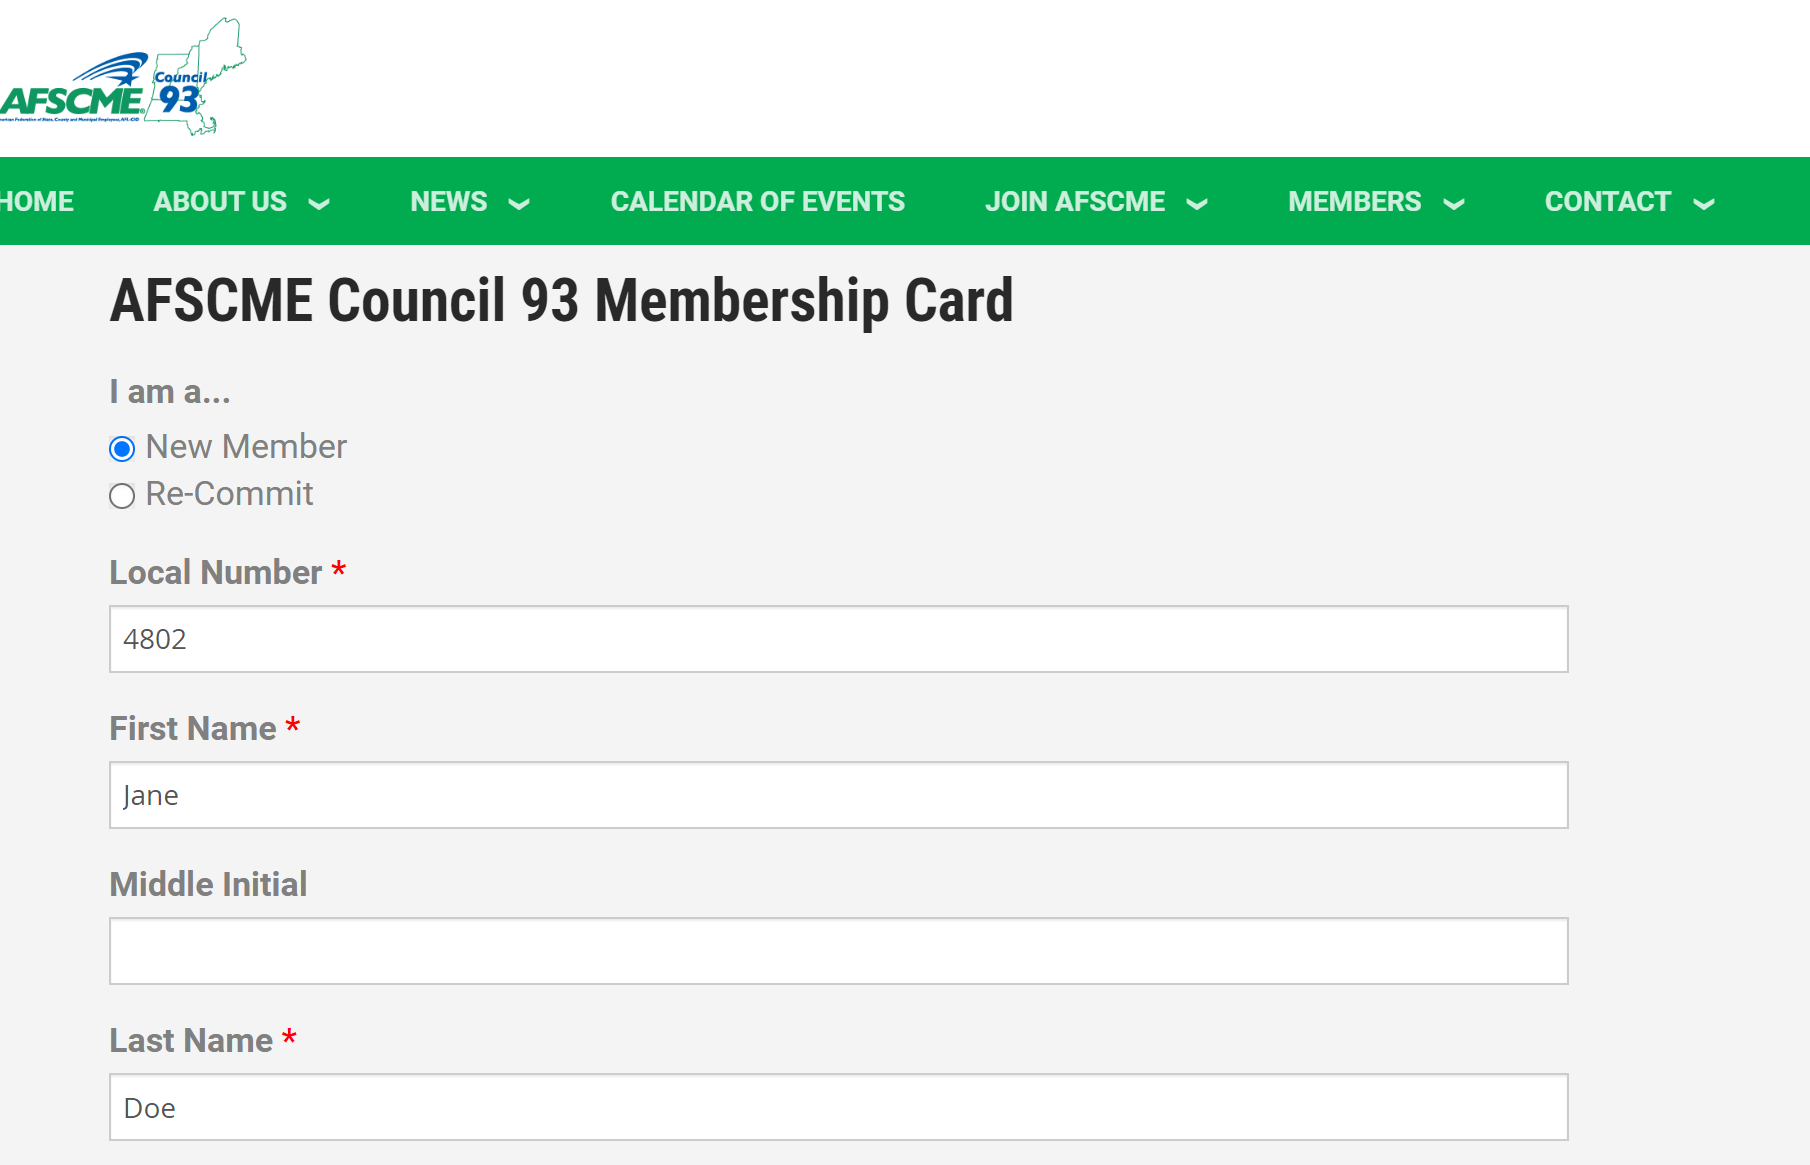 A screenshot of the American Federation of State, County, and Municipal Employees Council 93 electronic Membership Card, with some sections filled as an example. (New Member, First name Jane, Last name Doe).